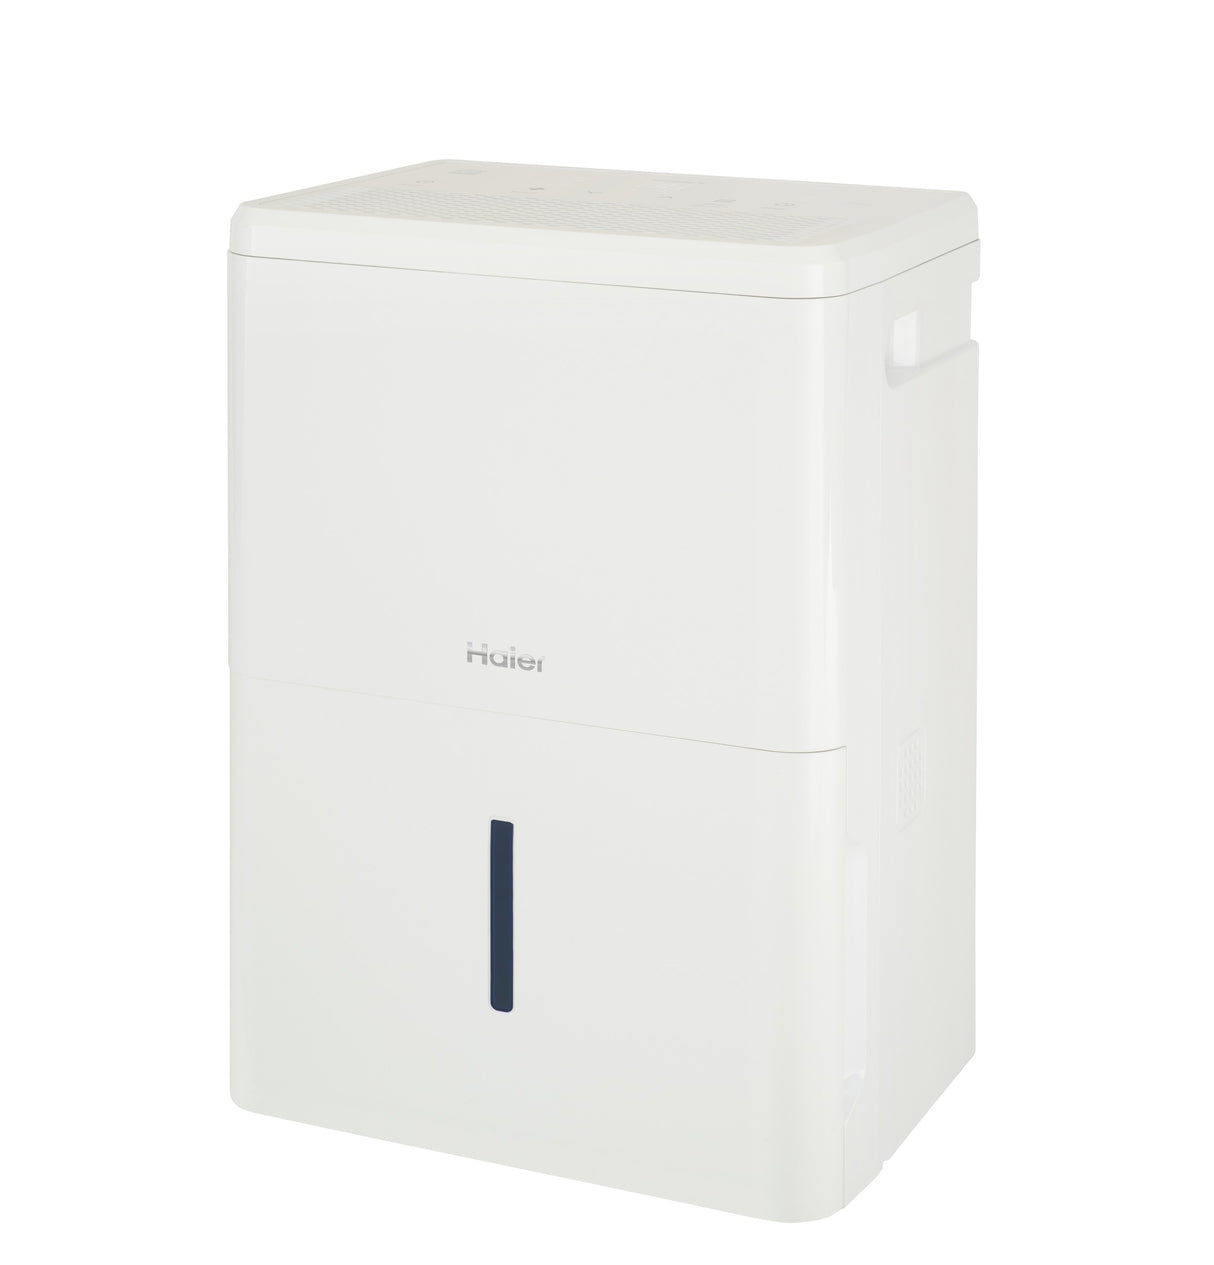 Haier 20 Pint ENERGY STAR(R) Portable Dehumidifier with Smart Dry for Damp Spaces - (QDHR20LZ)